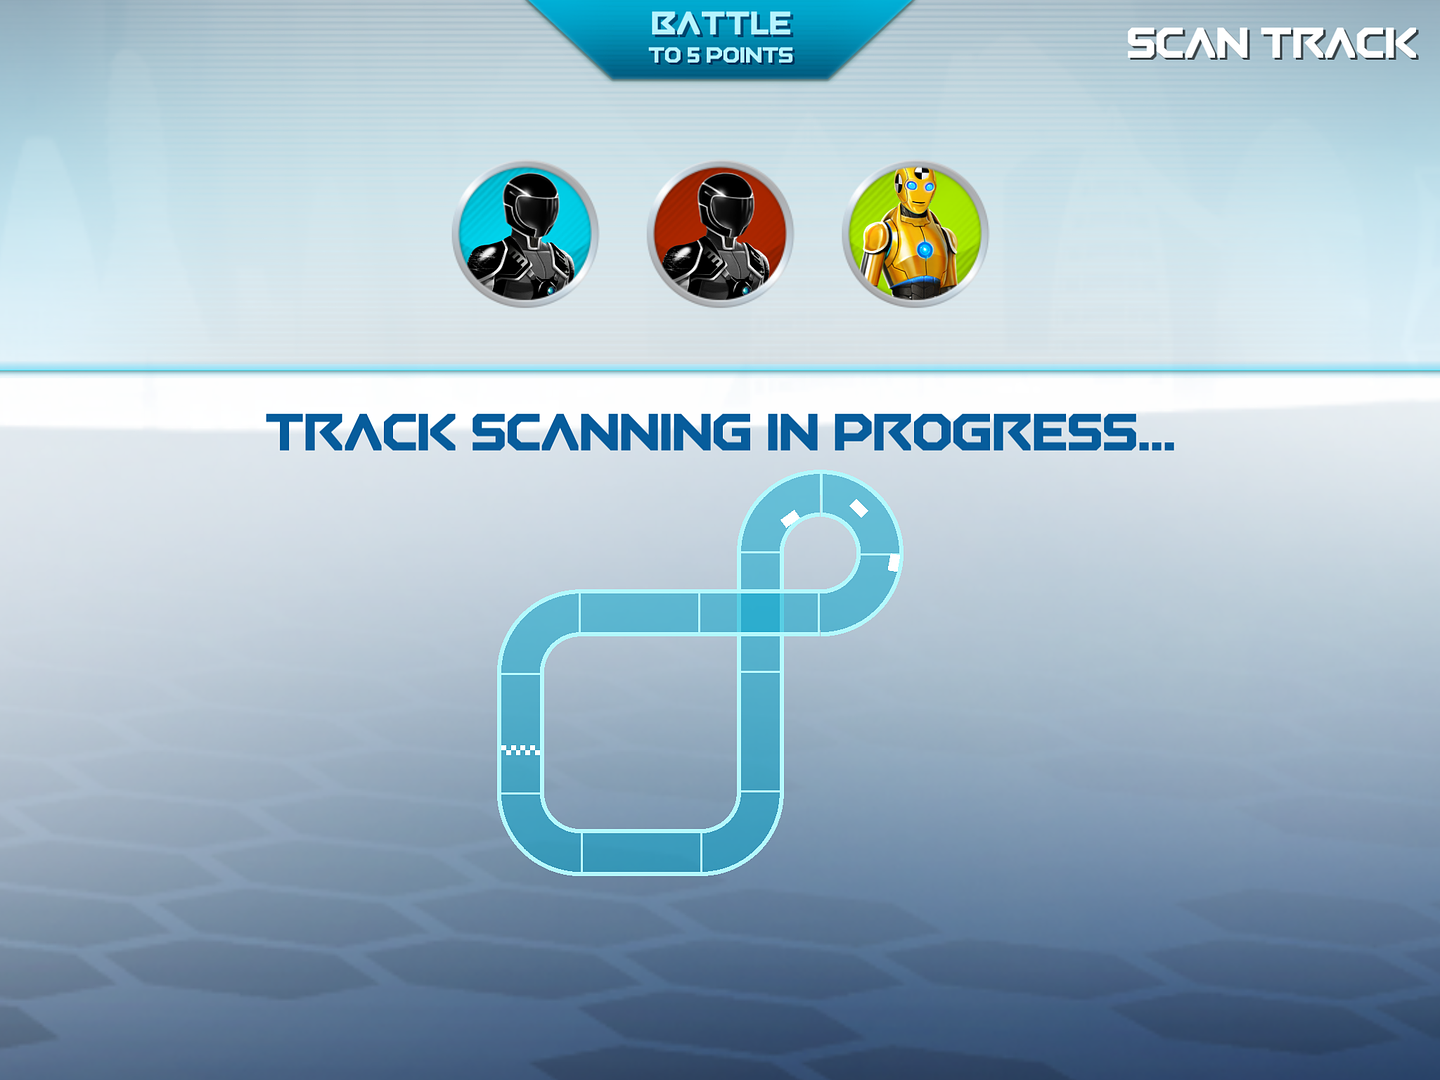 Anki OVERDRIVE: The cars auto-scan your track configuration before play. Amazing.